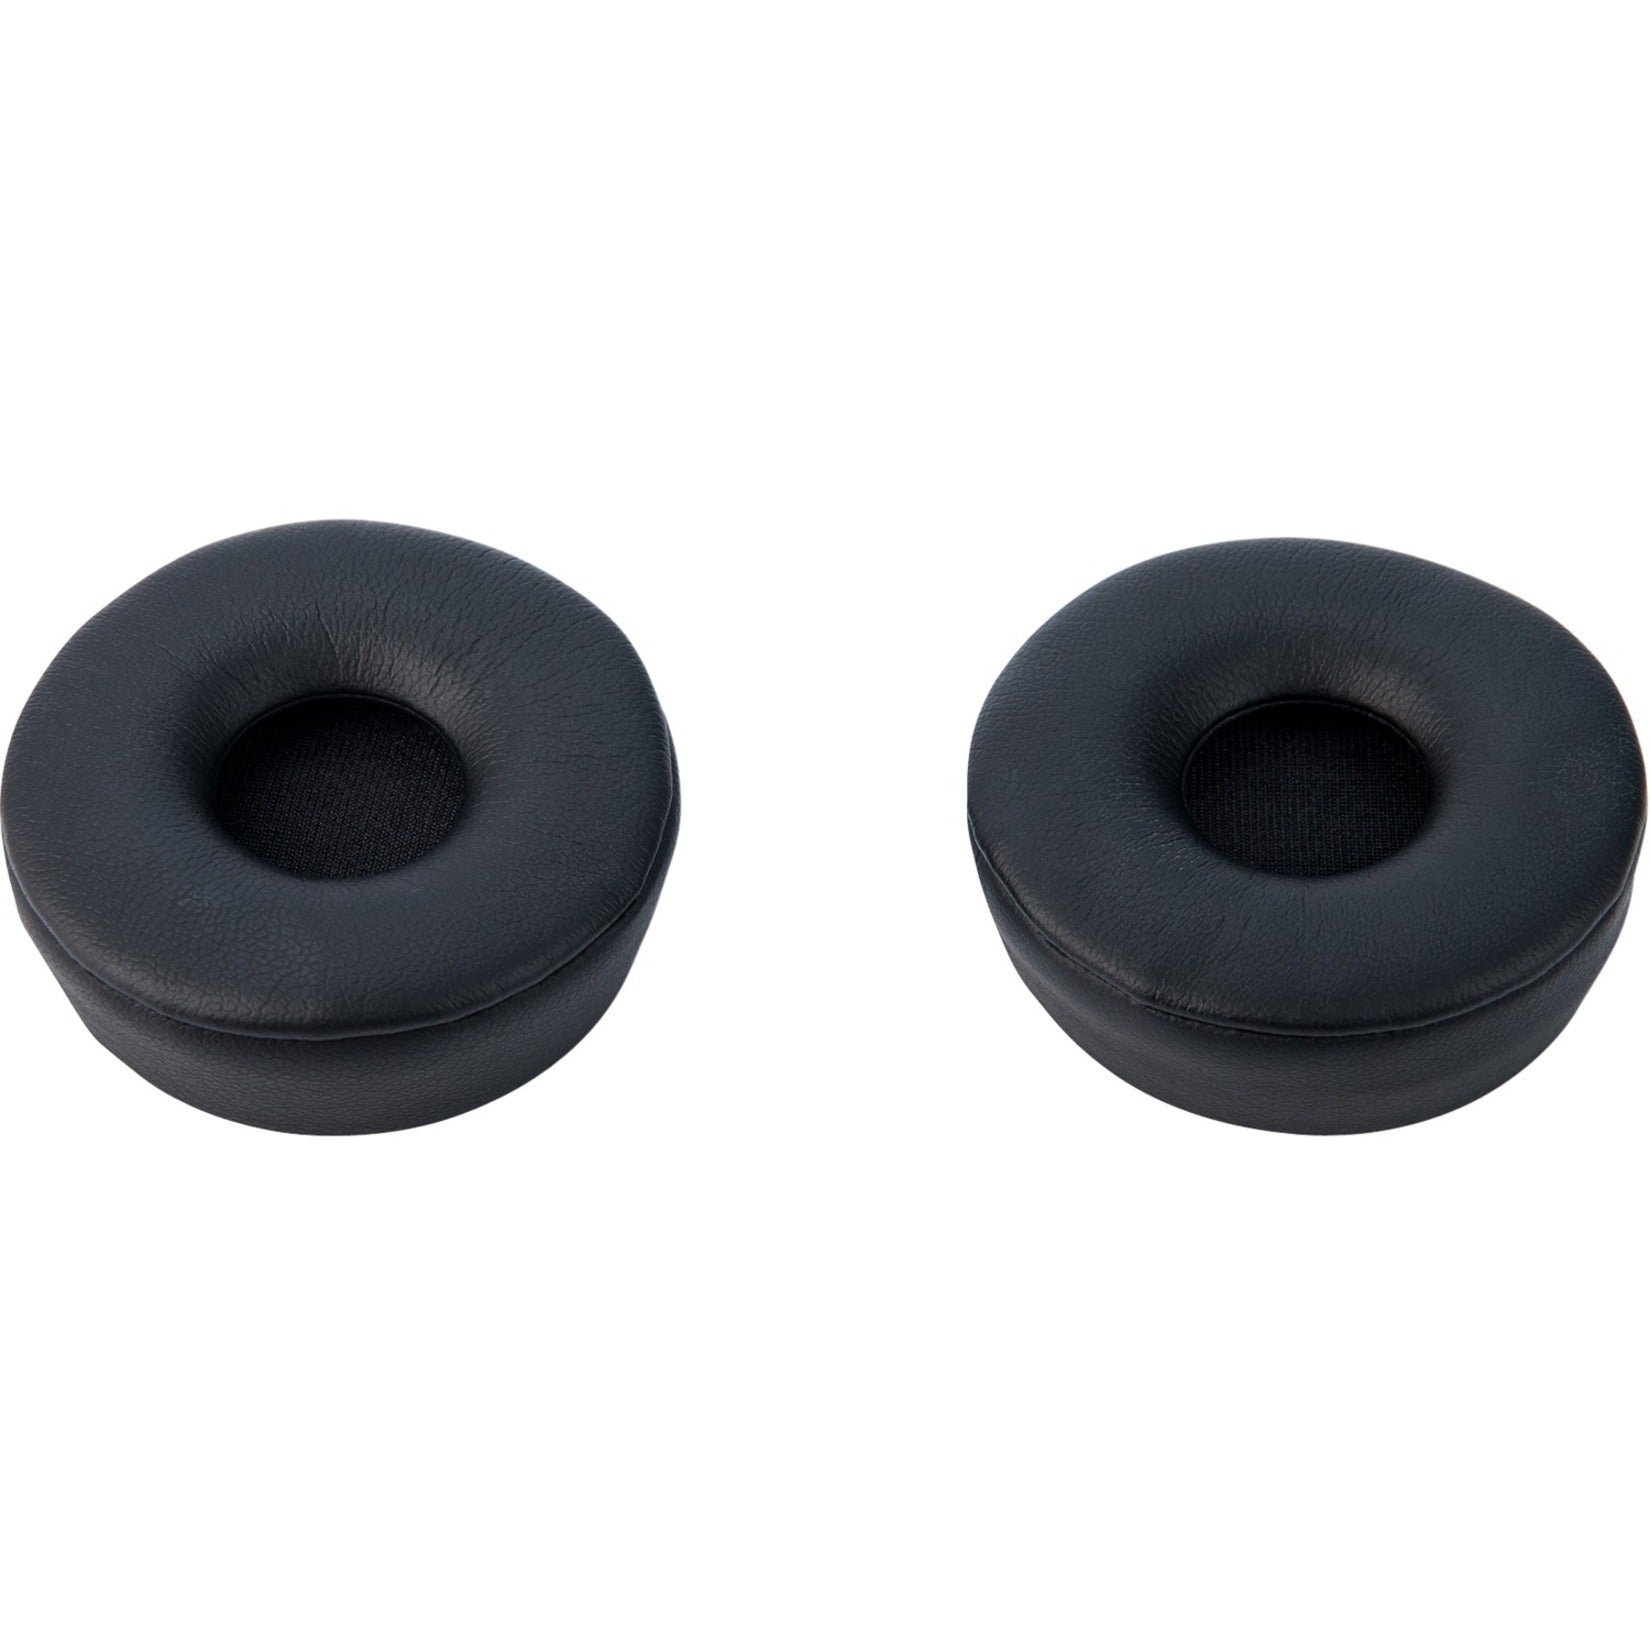 Jabra 14101-72 Ear Cushion, BLK Stereo HS 1 pair - Compatible with Jabra Engage 65/75 Headsets